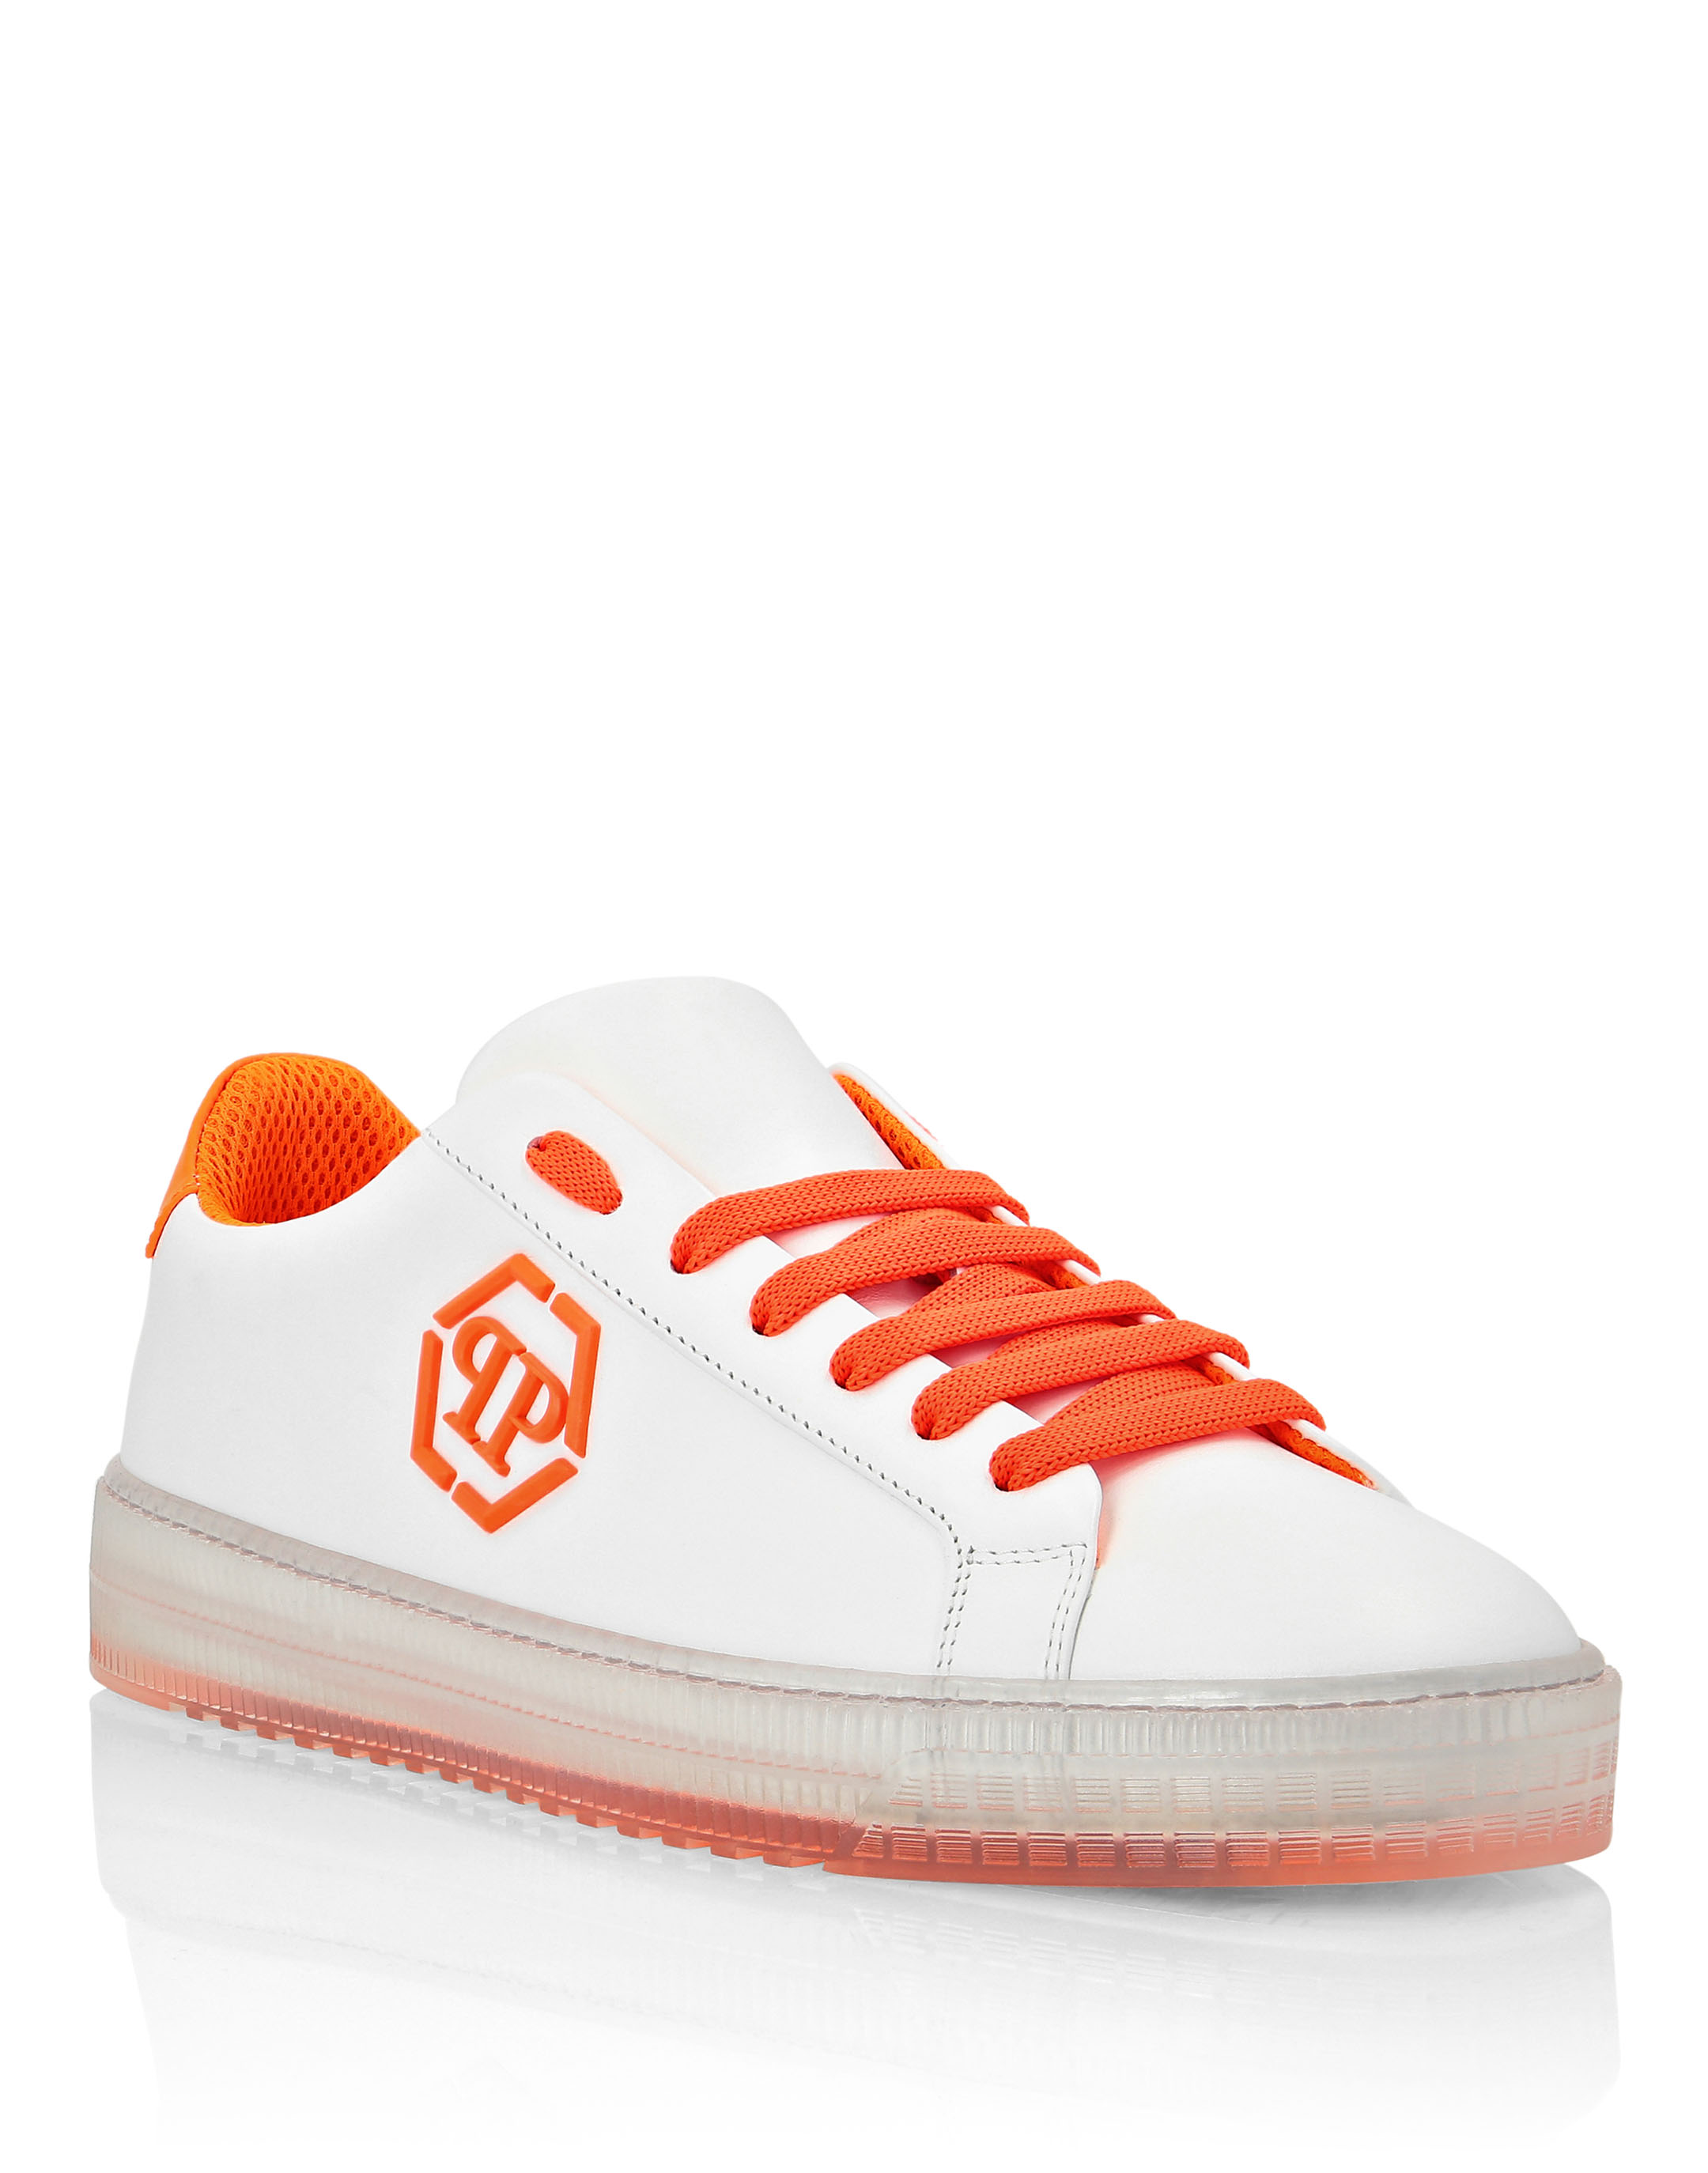 Moschino LOVE Fluorescent Leather Sneakers women - Glamood Outlet